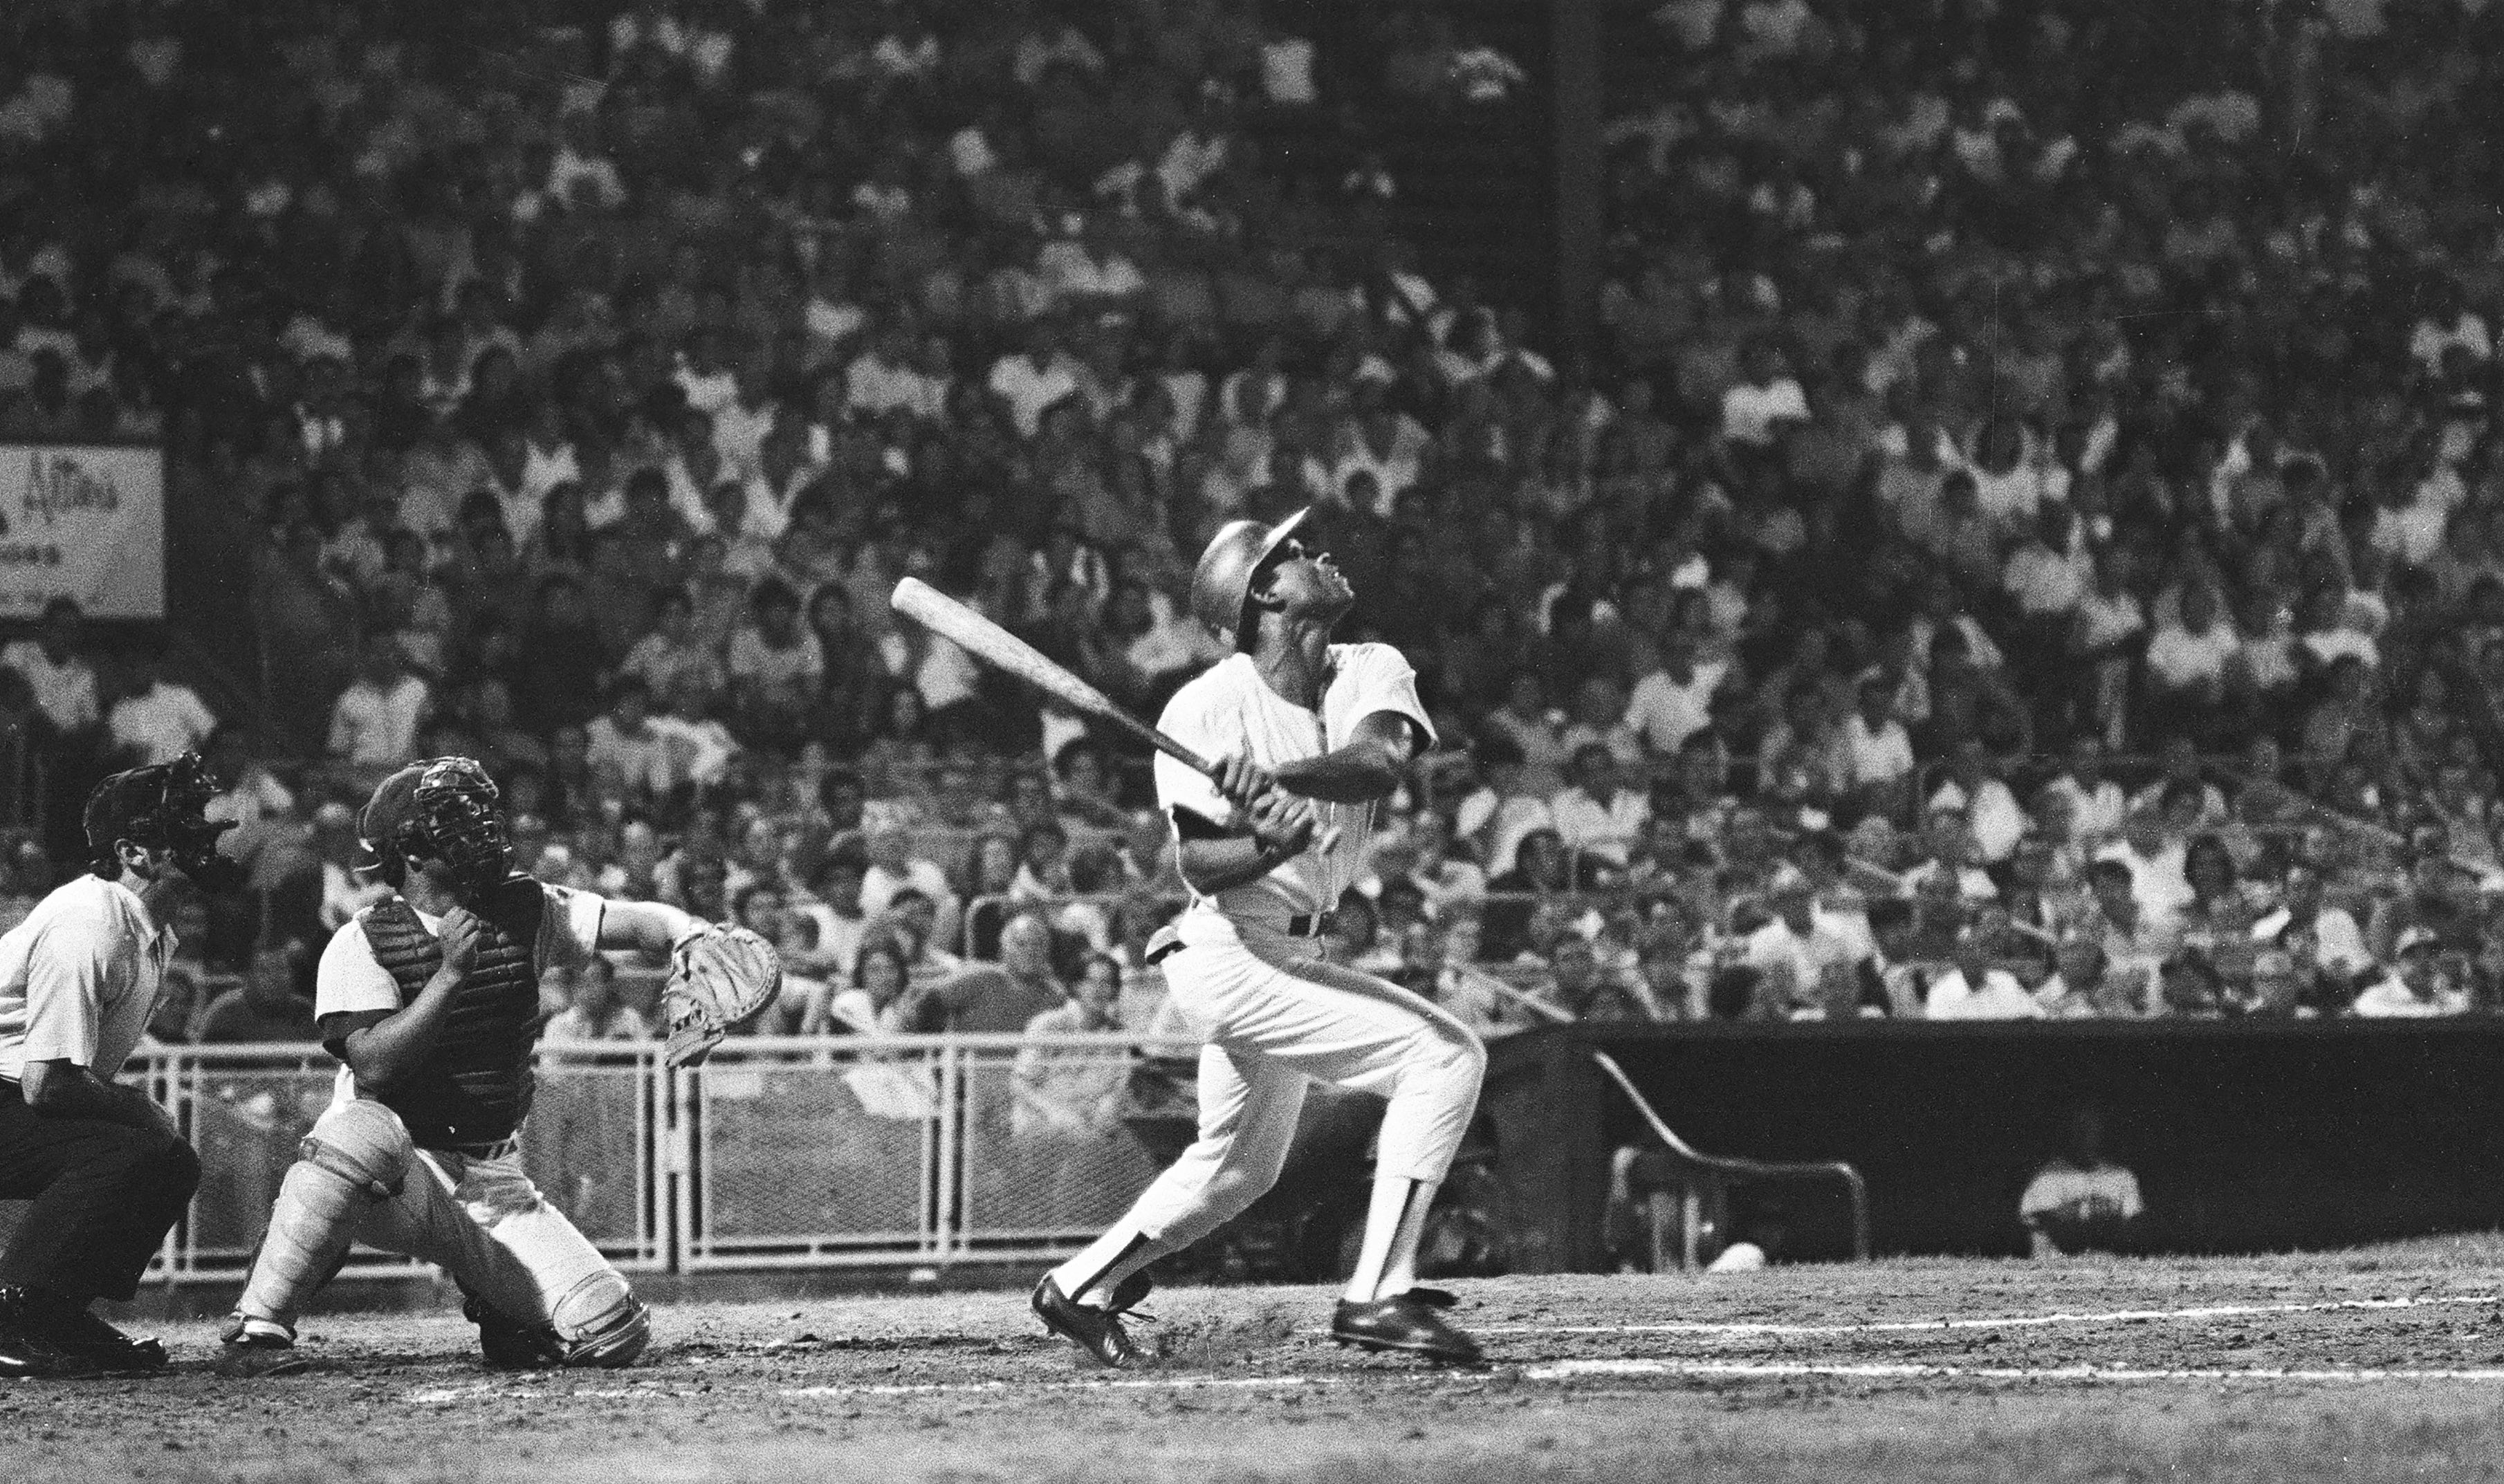 Rochester Red Wings vintage photos from the 1971 championship season